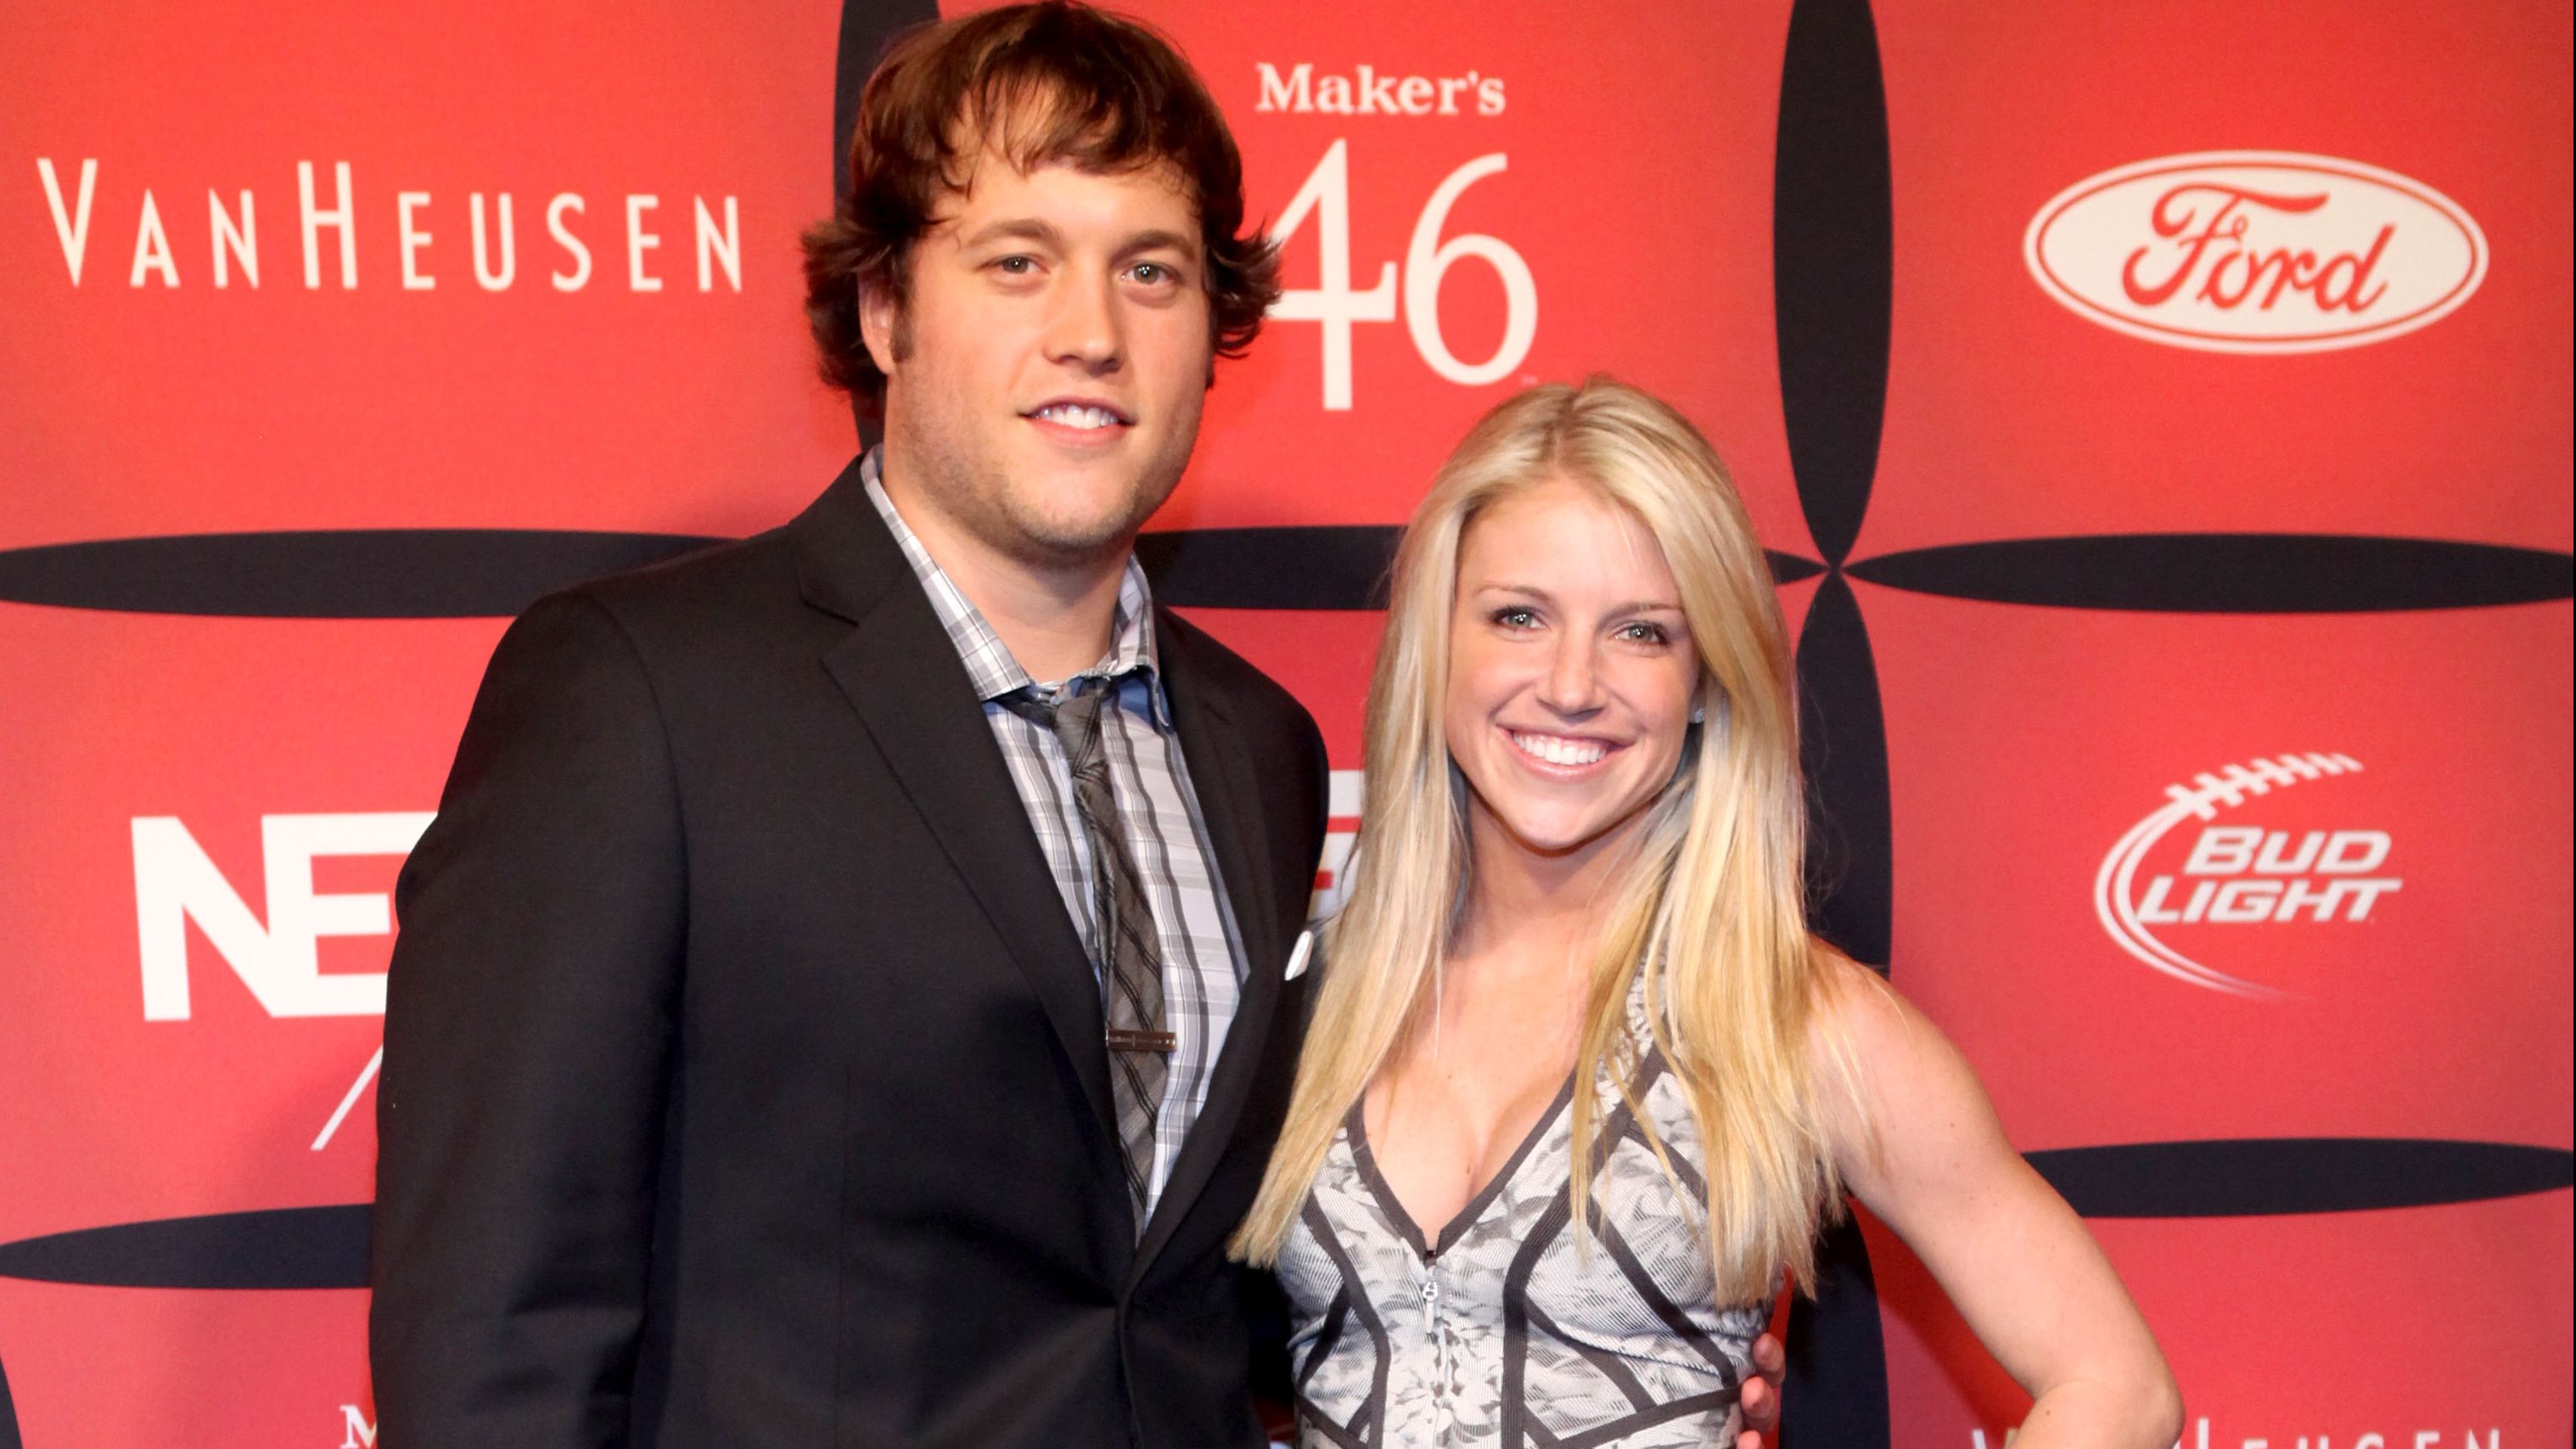 Who Is Matthew Stafford's Wife? All About Kelly Stafford